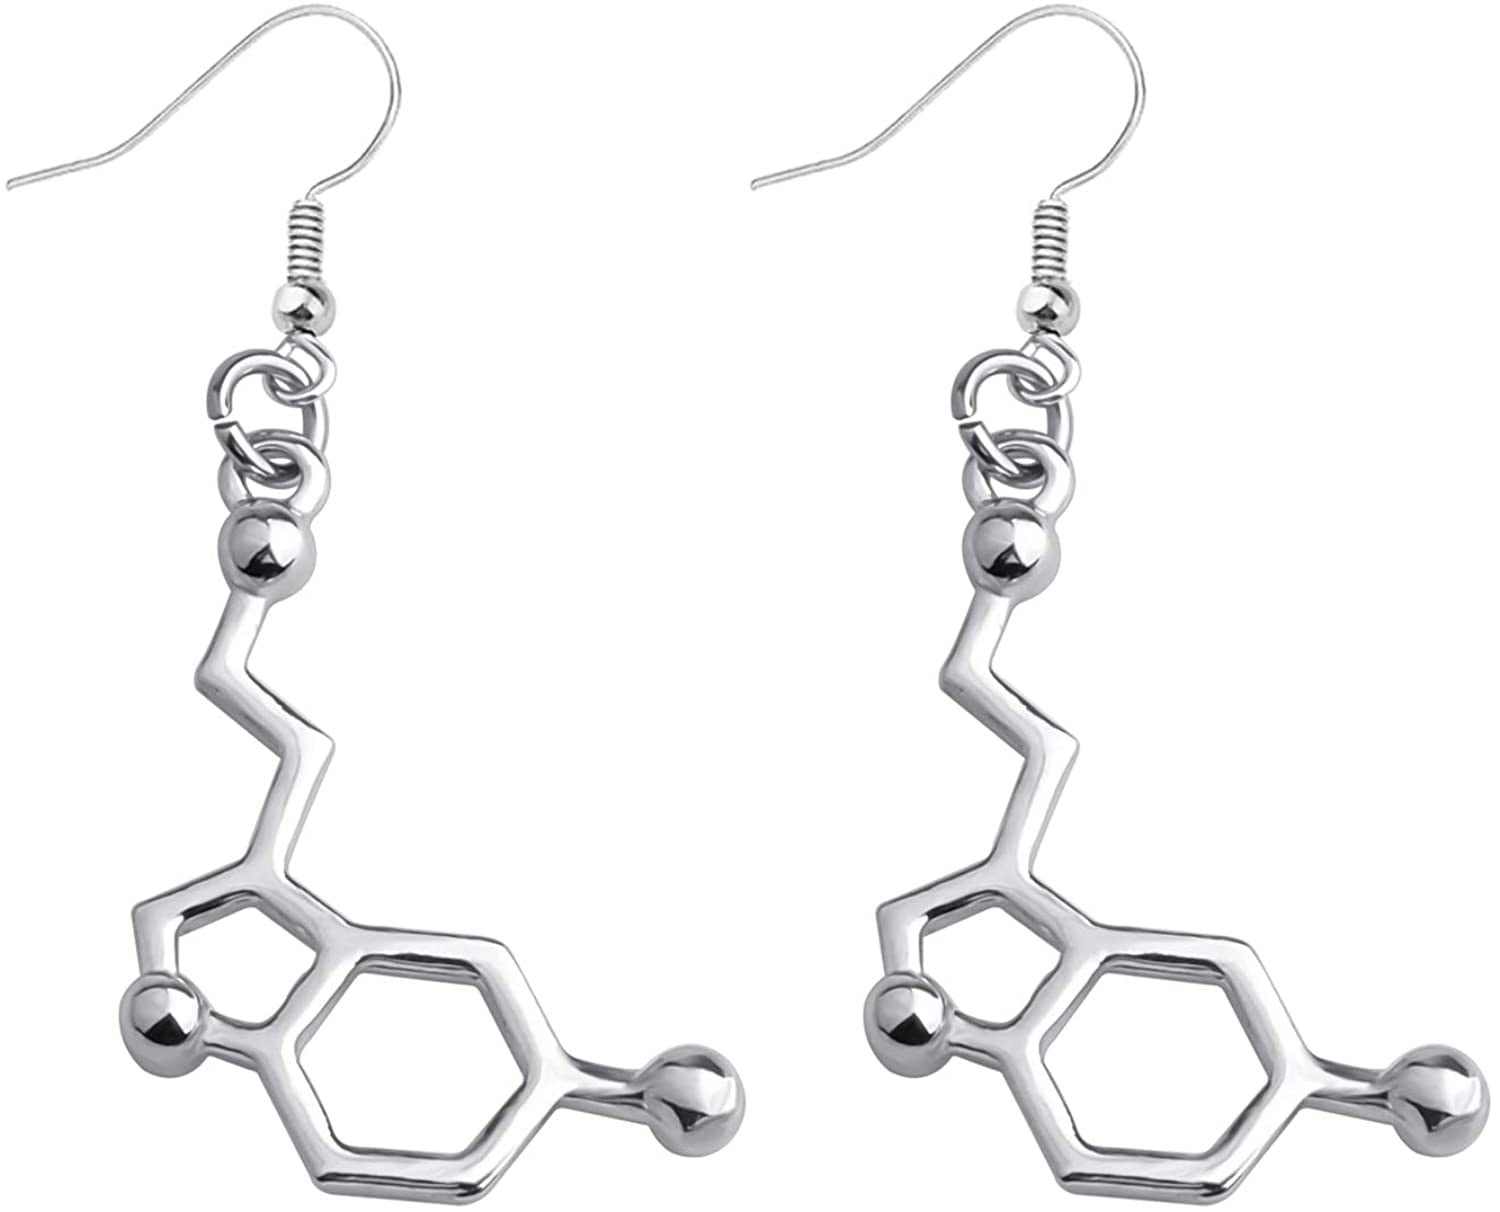 choice of all Caffeine Molecule Earrings Organic Chemistry Jewelry for Science Lovers and Science Major Happiness Neurotransmitter Earrings